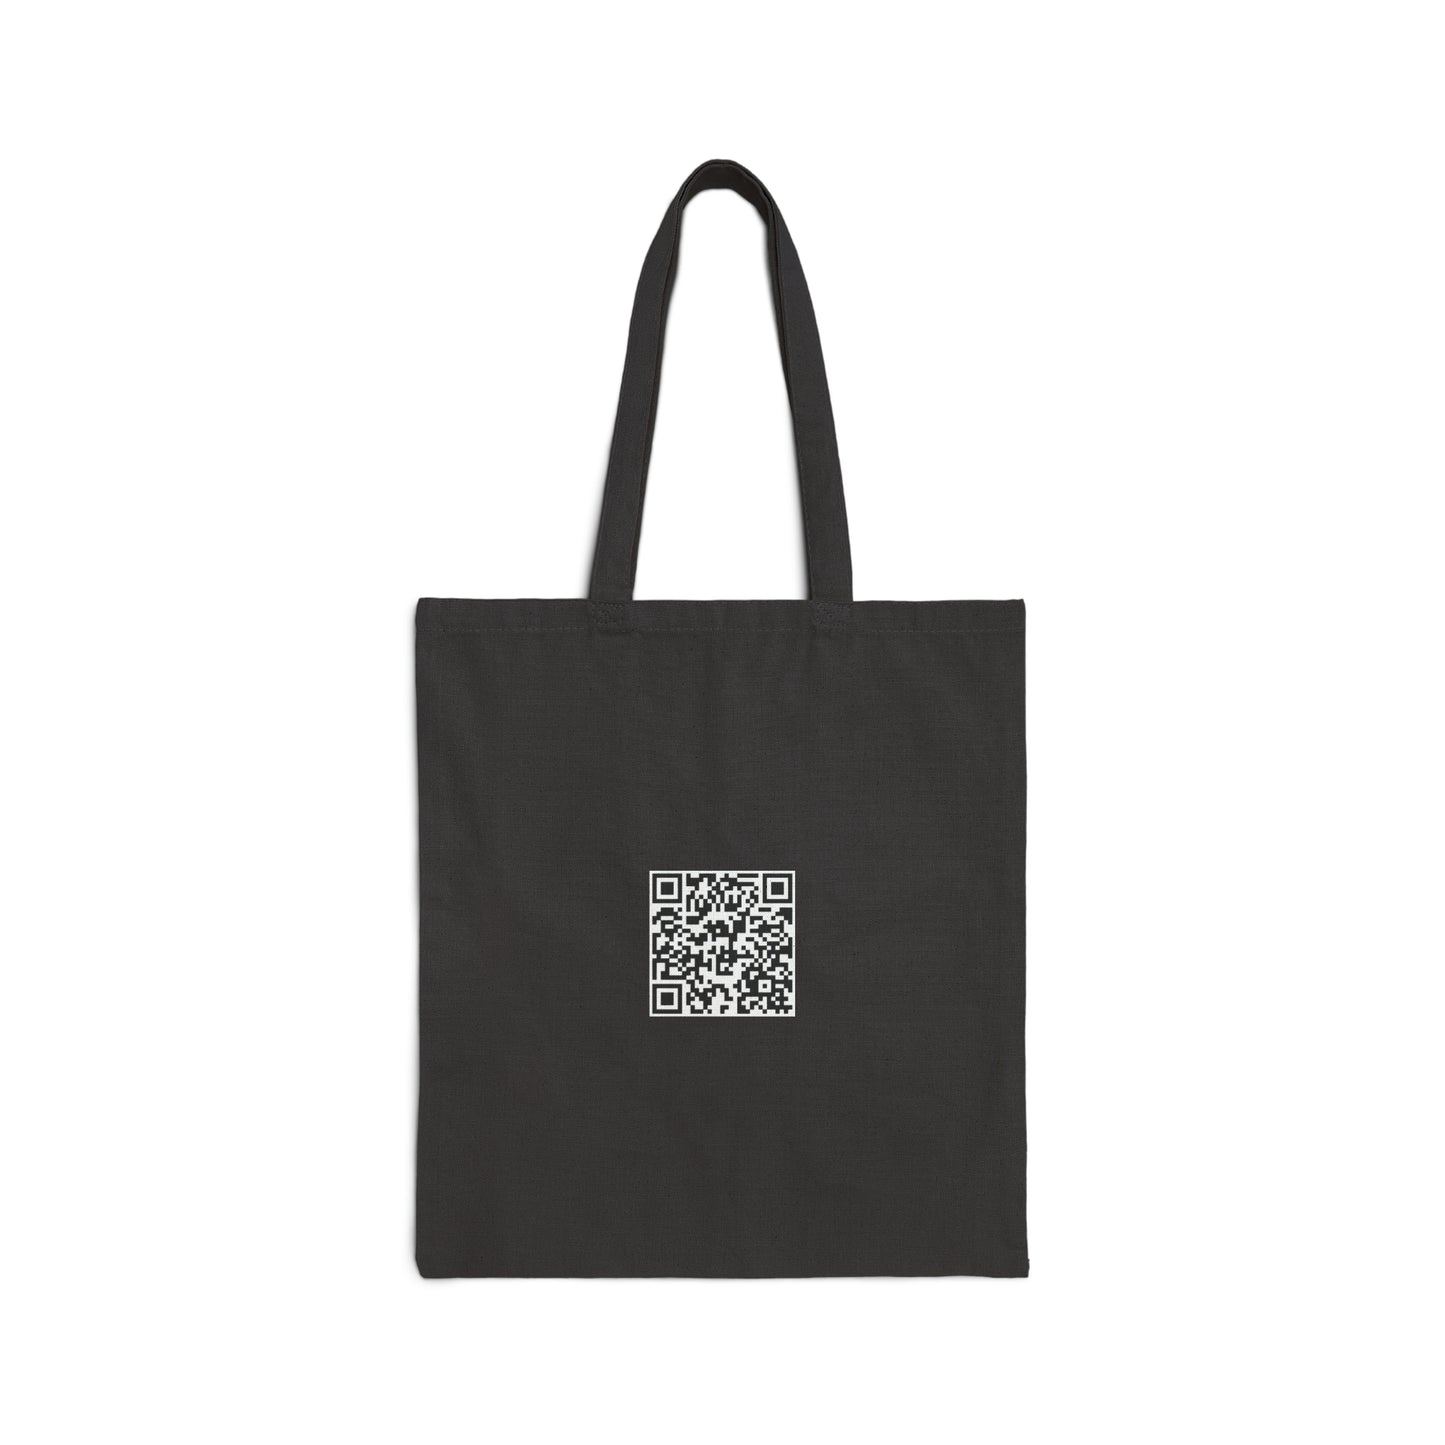 Heir of Fury - Cotton Canvas Tote Bag